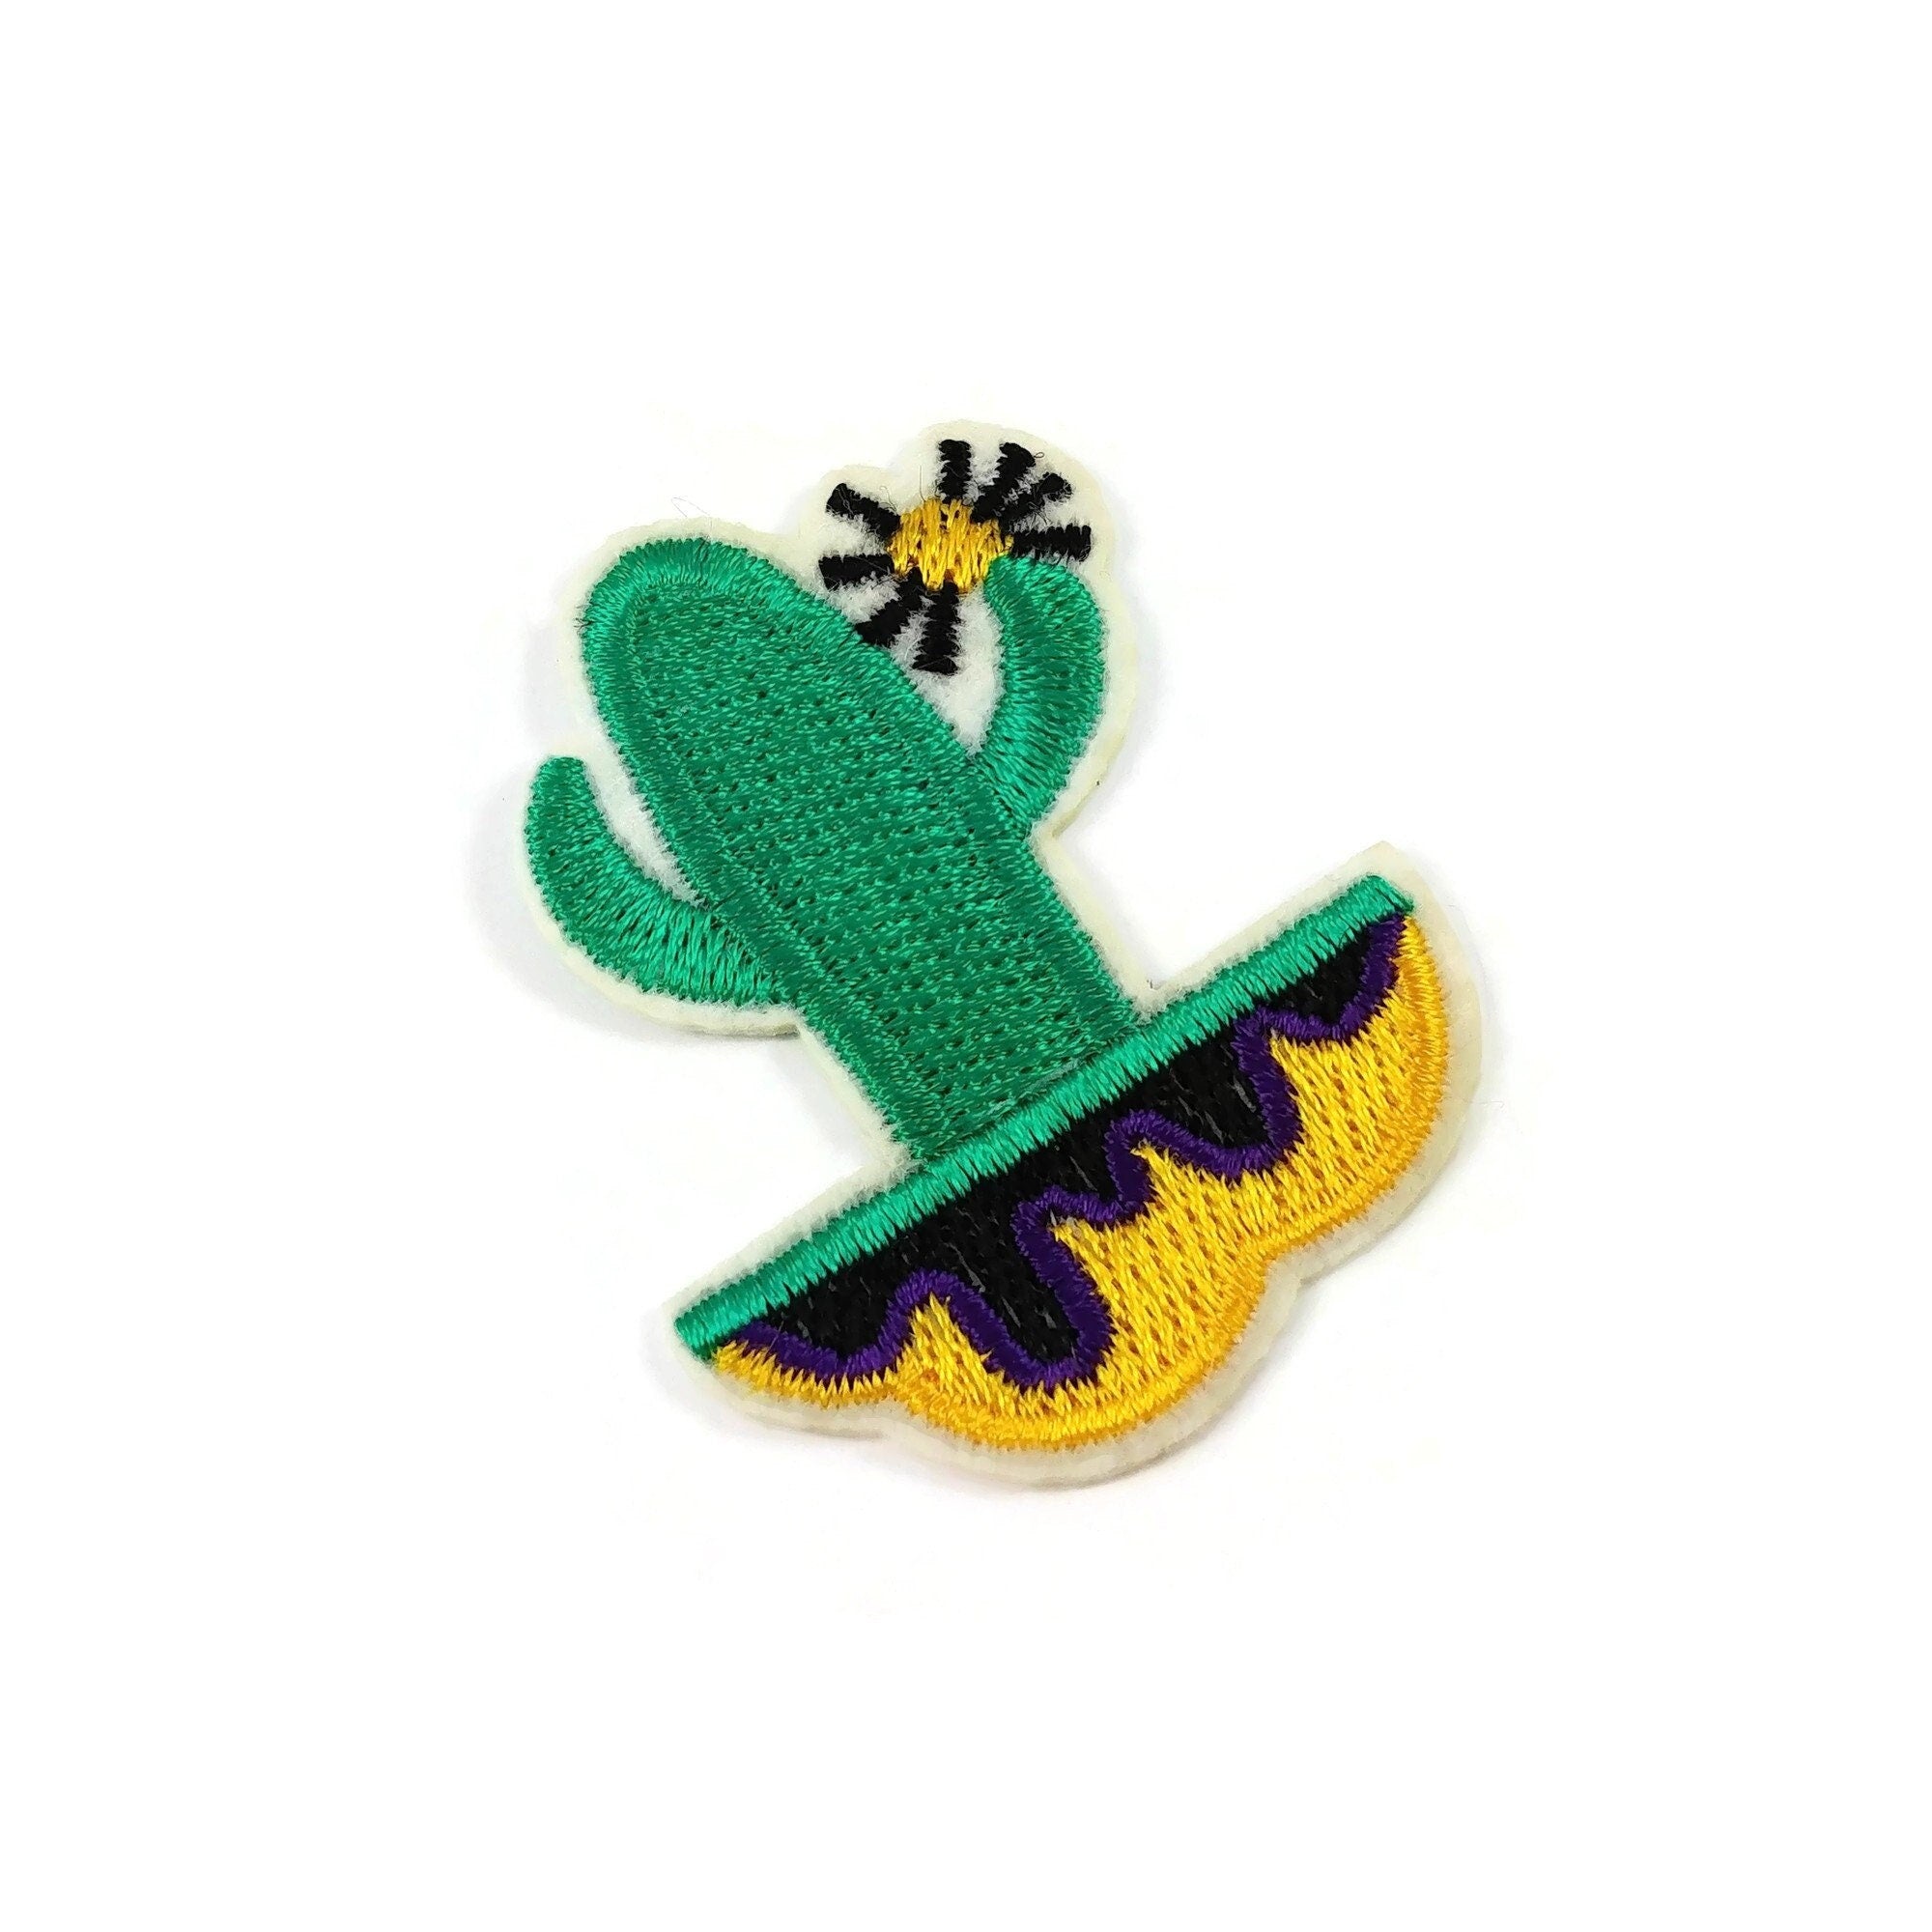 Cactus iron on patch, Embroidered sew on patch, Desert applique